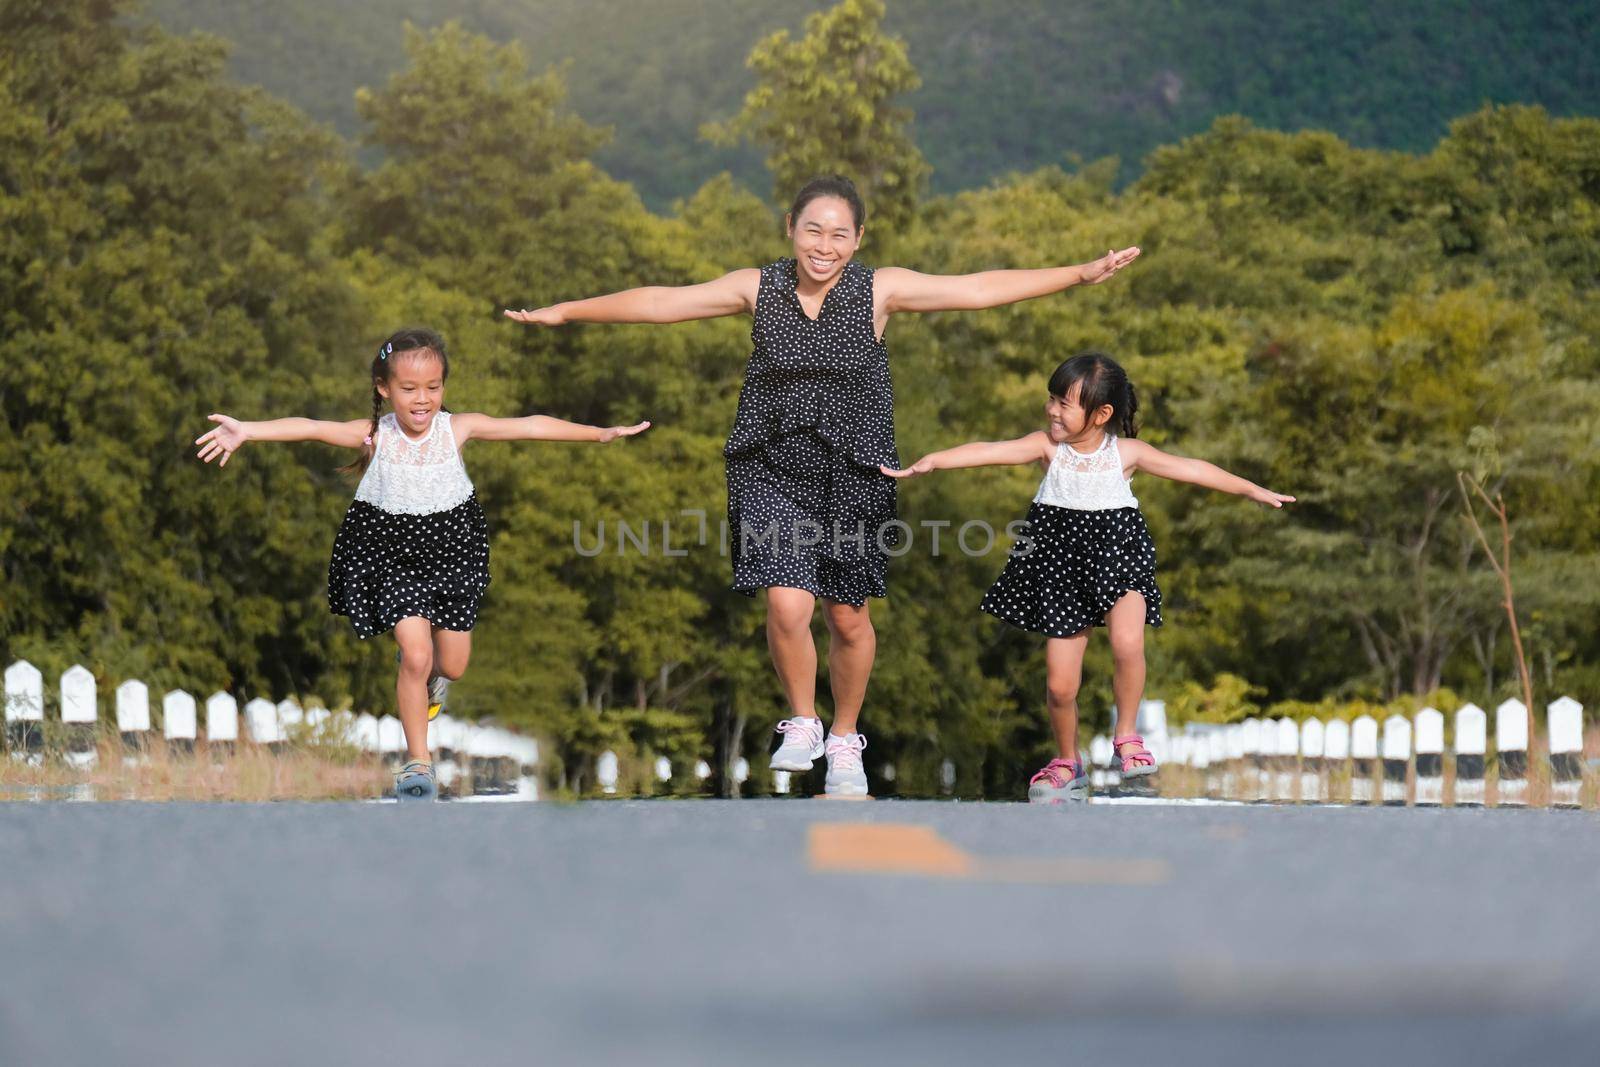 Two lovely daughters are running with their mother spreading their arms as if flying on the road in the park. Happy mother plays with the children in the park, spending time together on vacation. by TEERASAK